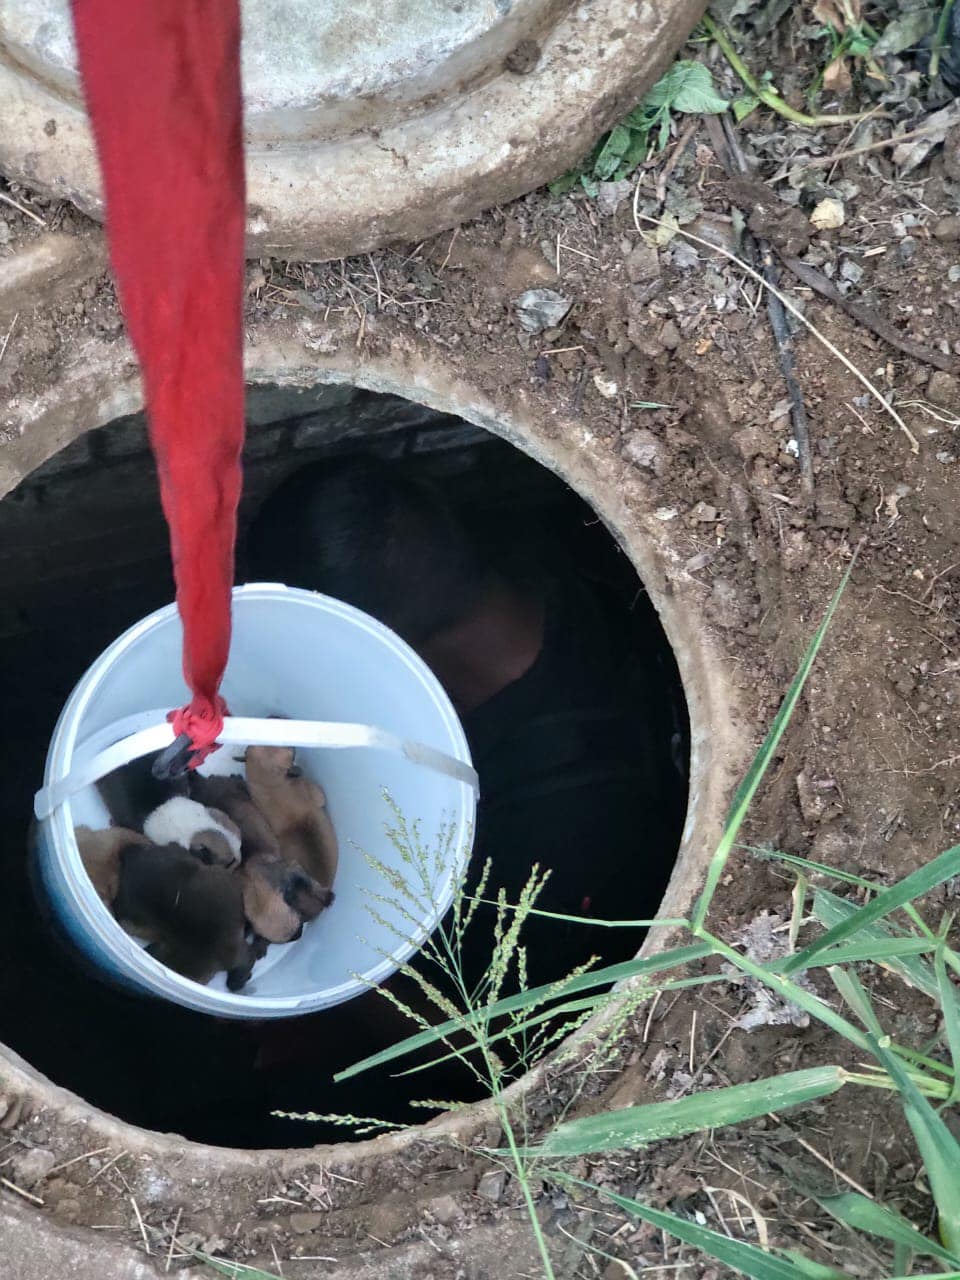 Puppies rescued from a drain in Riverview